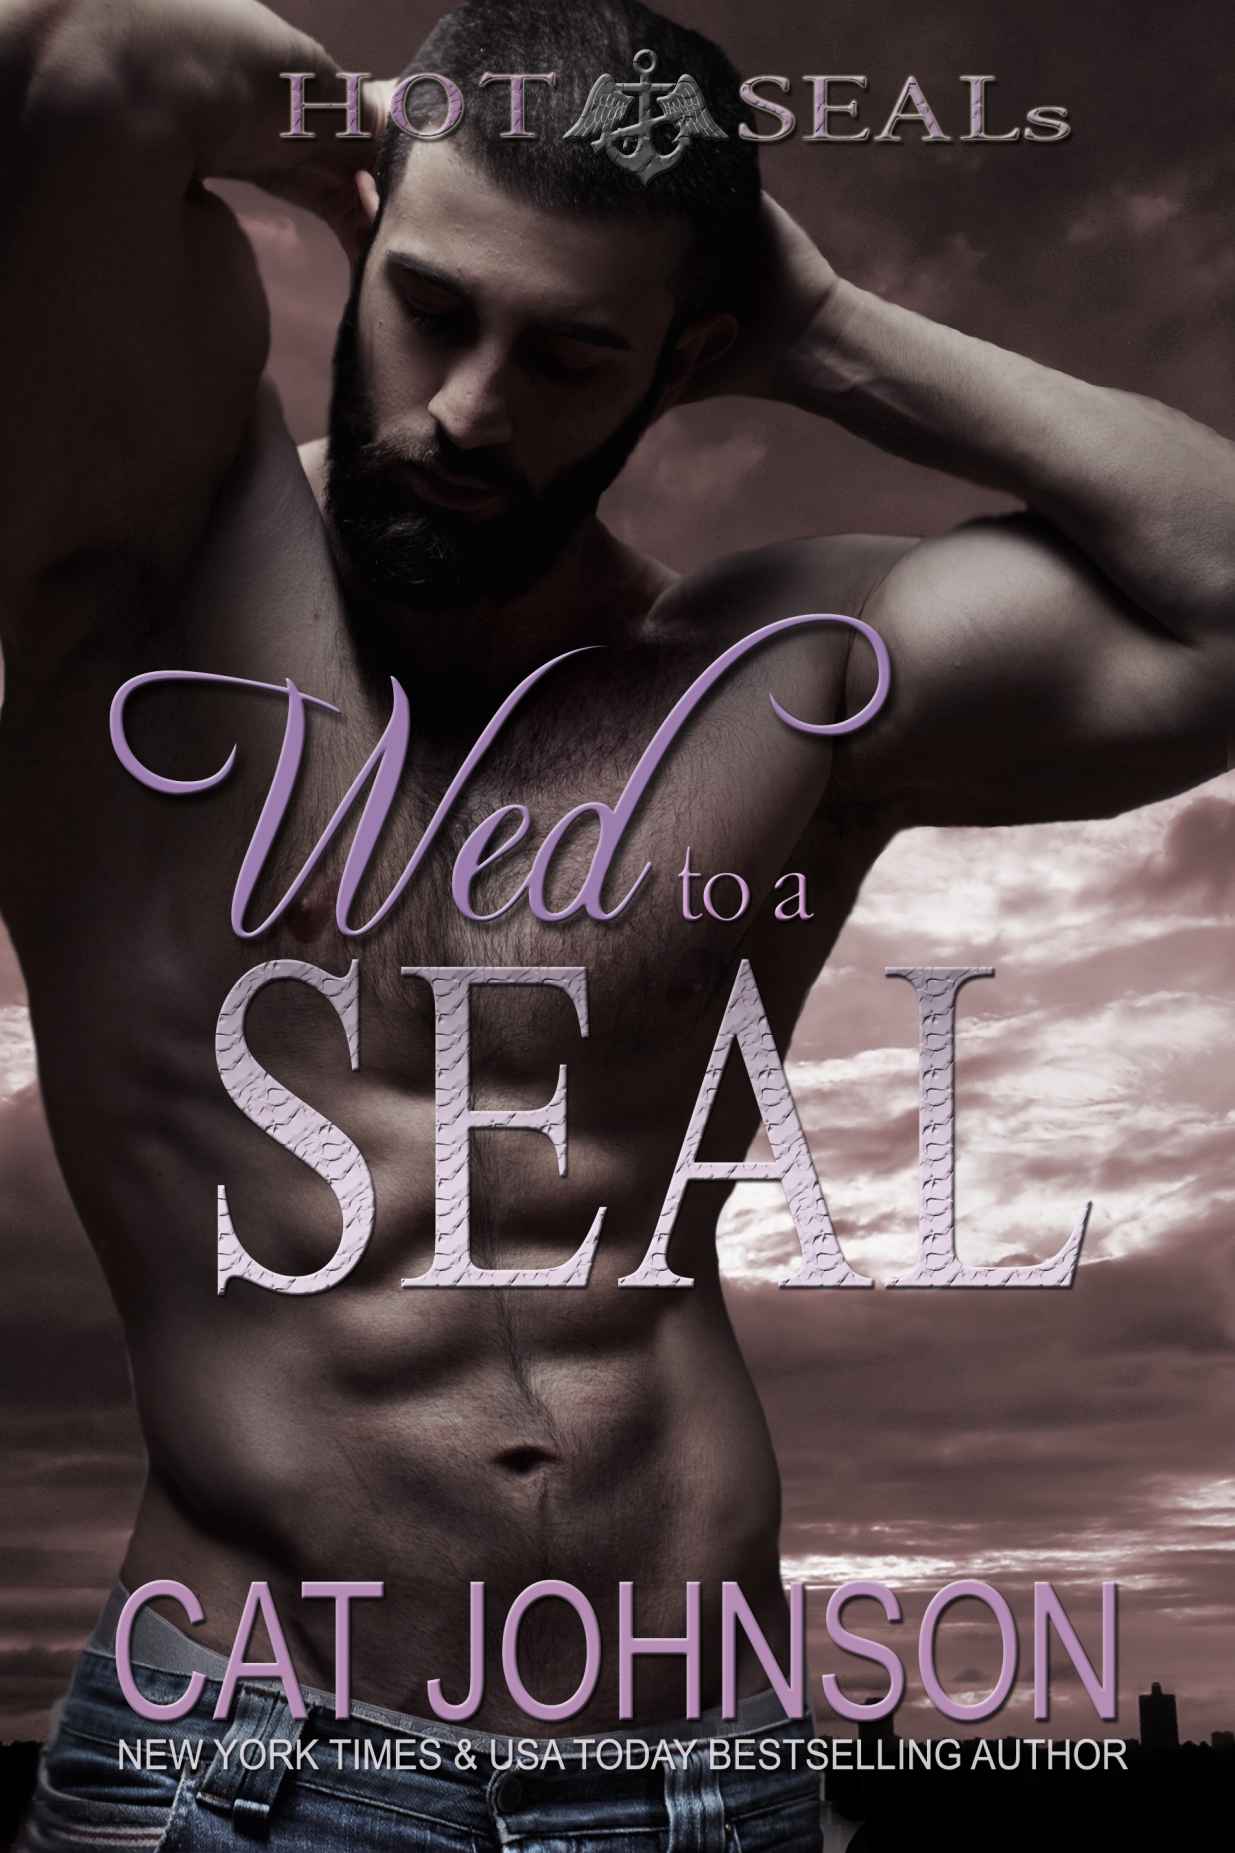 Wed to a SEAL (Hot SEALs) (Volume 8) by Cat Johnson